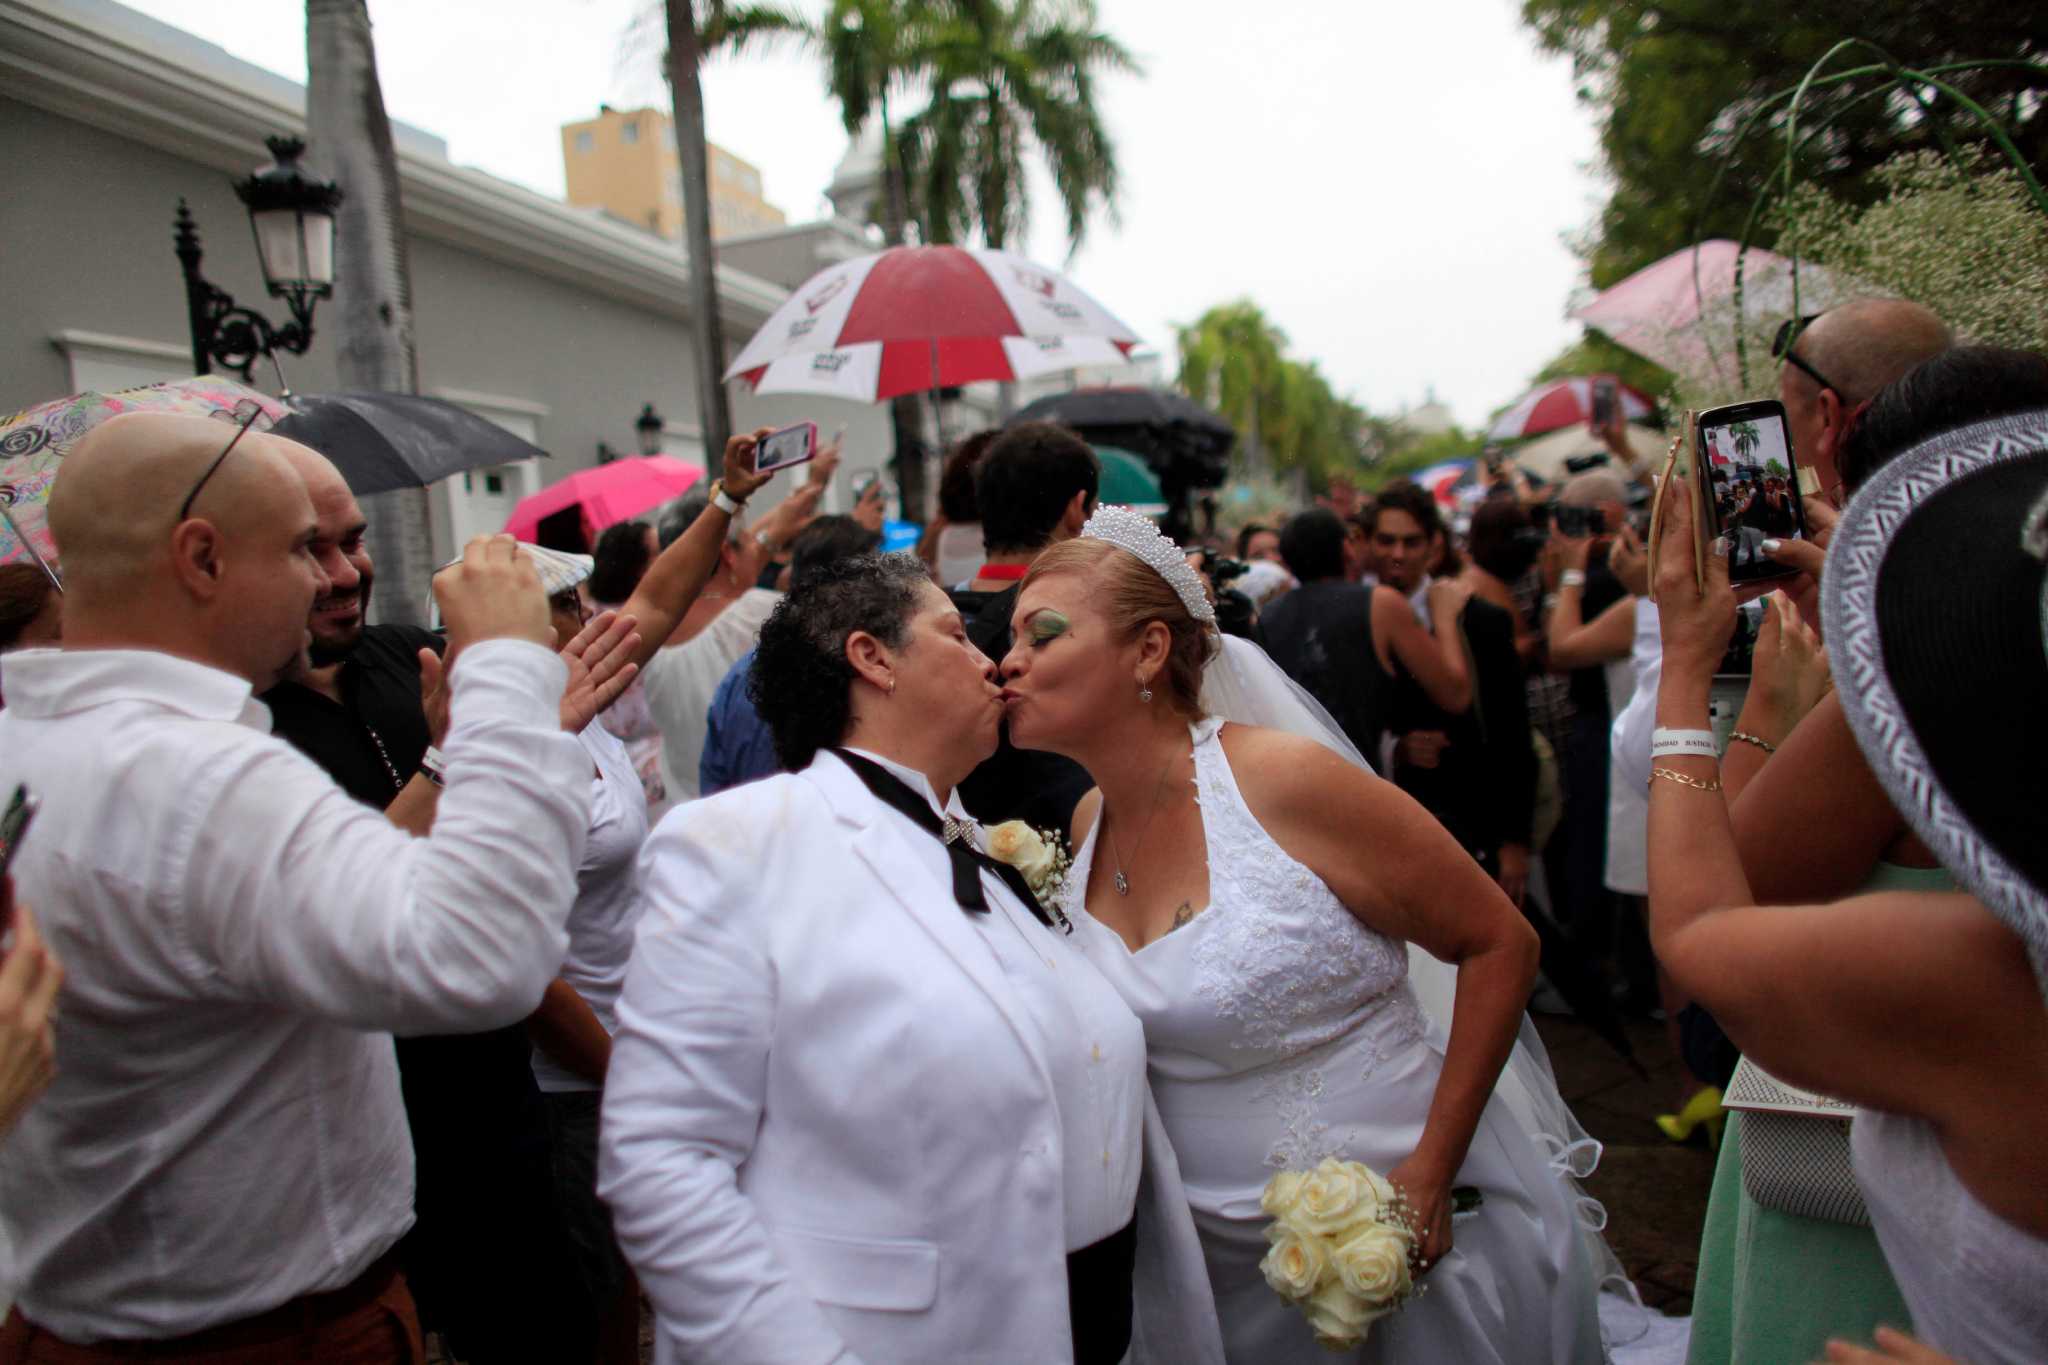 Over 60 same-sex couples married at Puerto Rico wedding pic